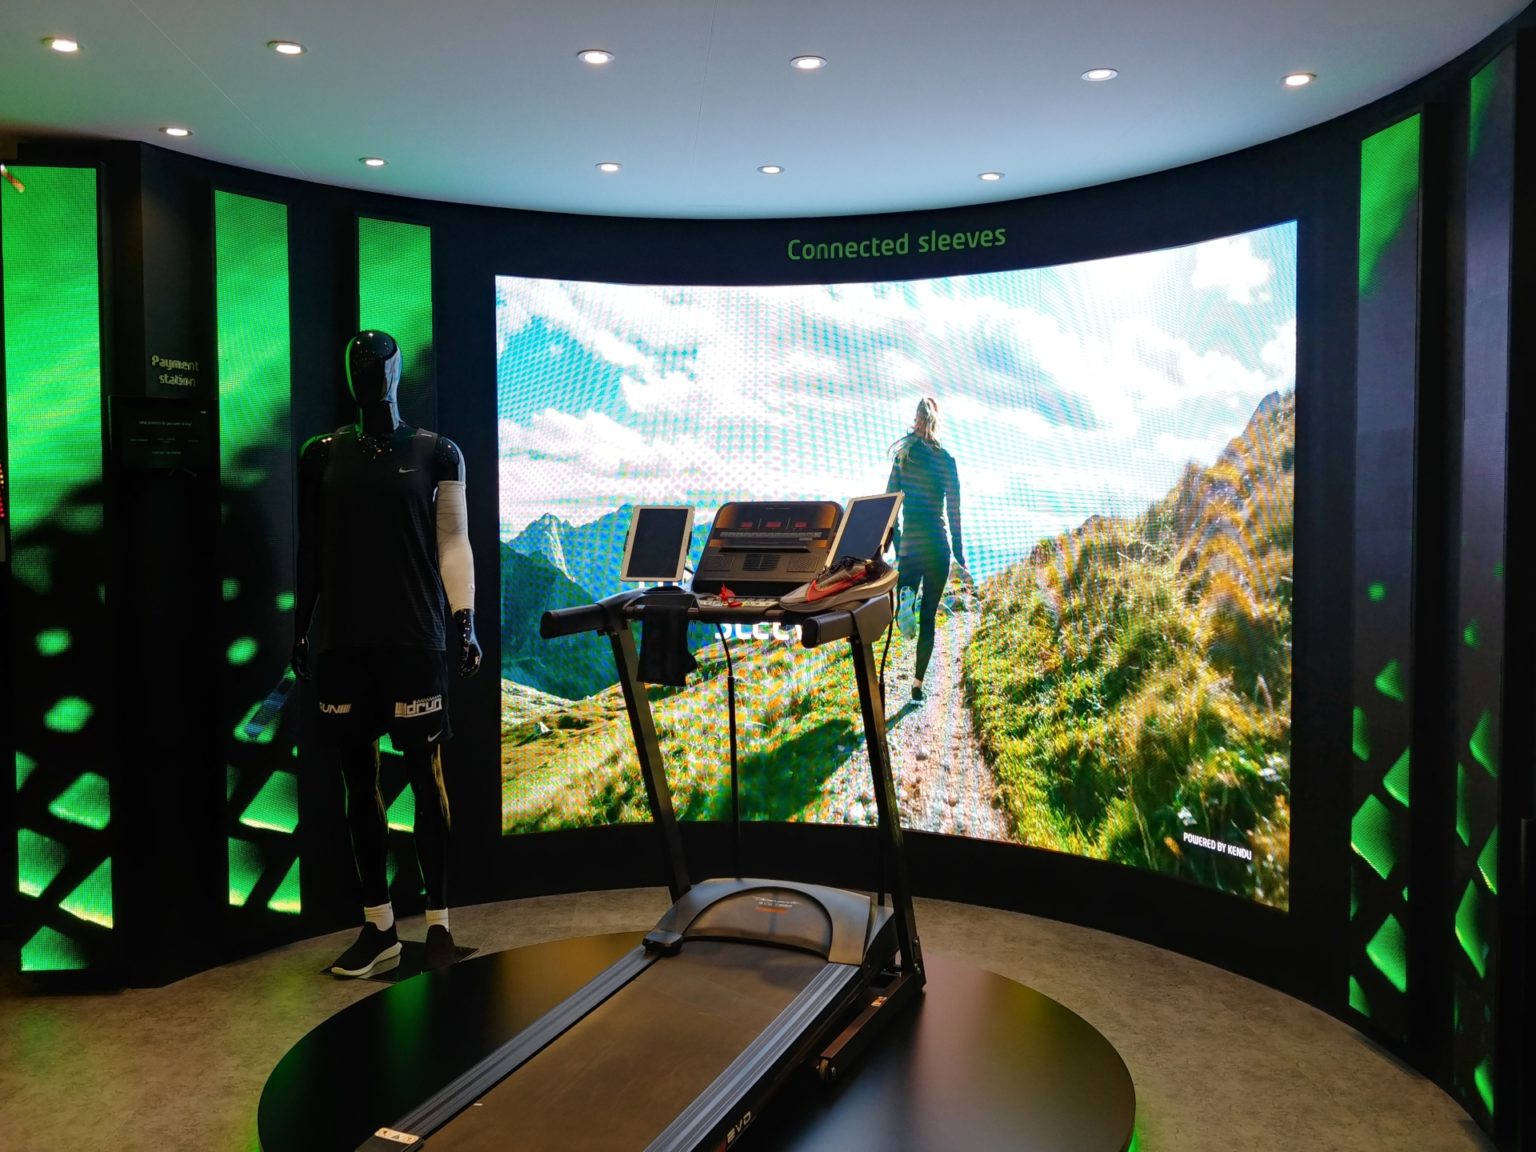 Black treadmill facing towards a screen with a runner on a trail from Etisalat's pilot for new retail technologies at Gitex